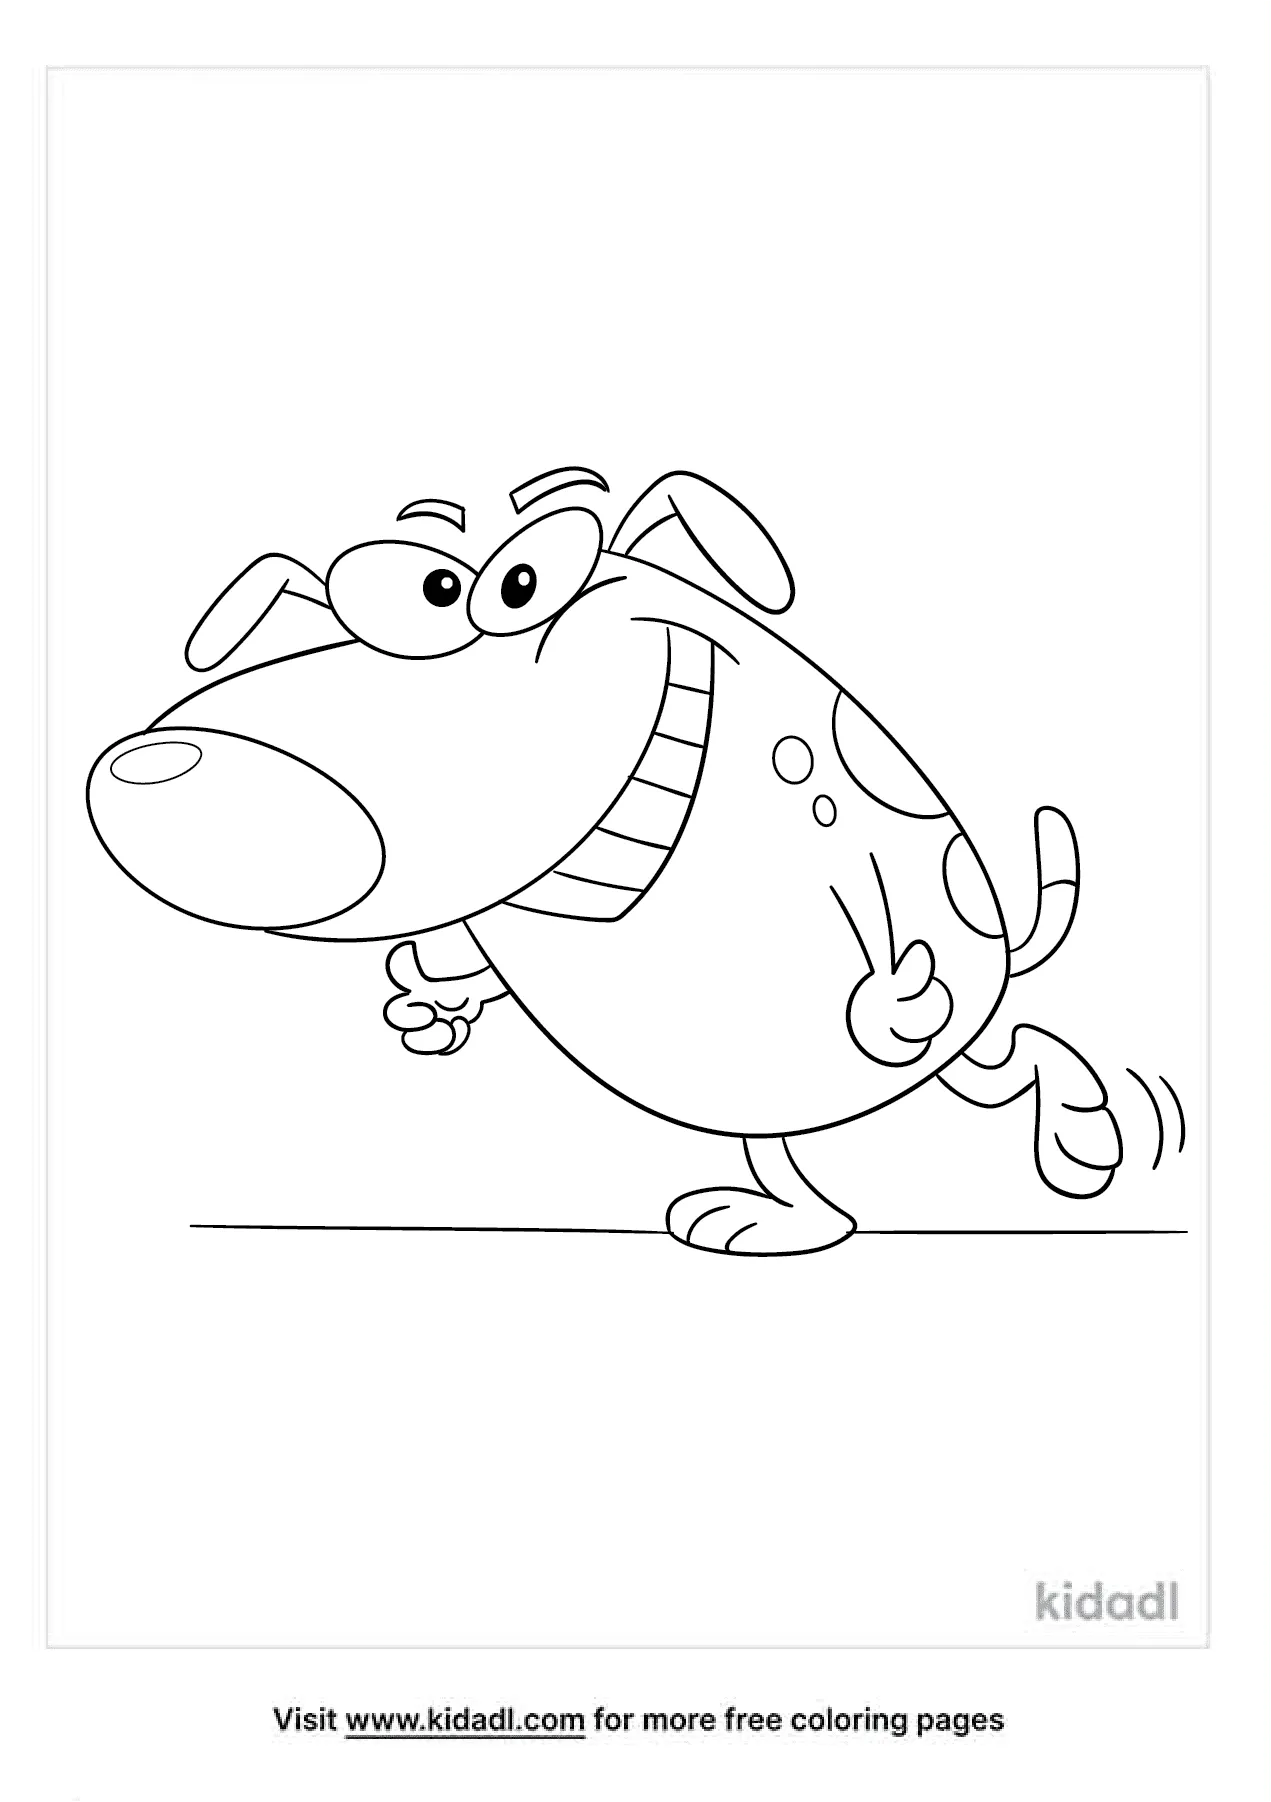 Puppy Dog Pals Coloring Pages Pdf Free To Print Coloringfolder ...